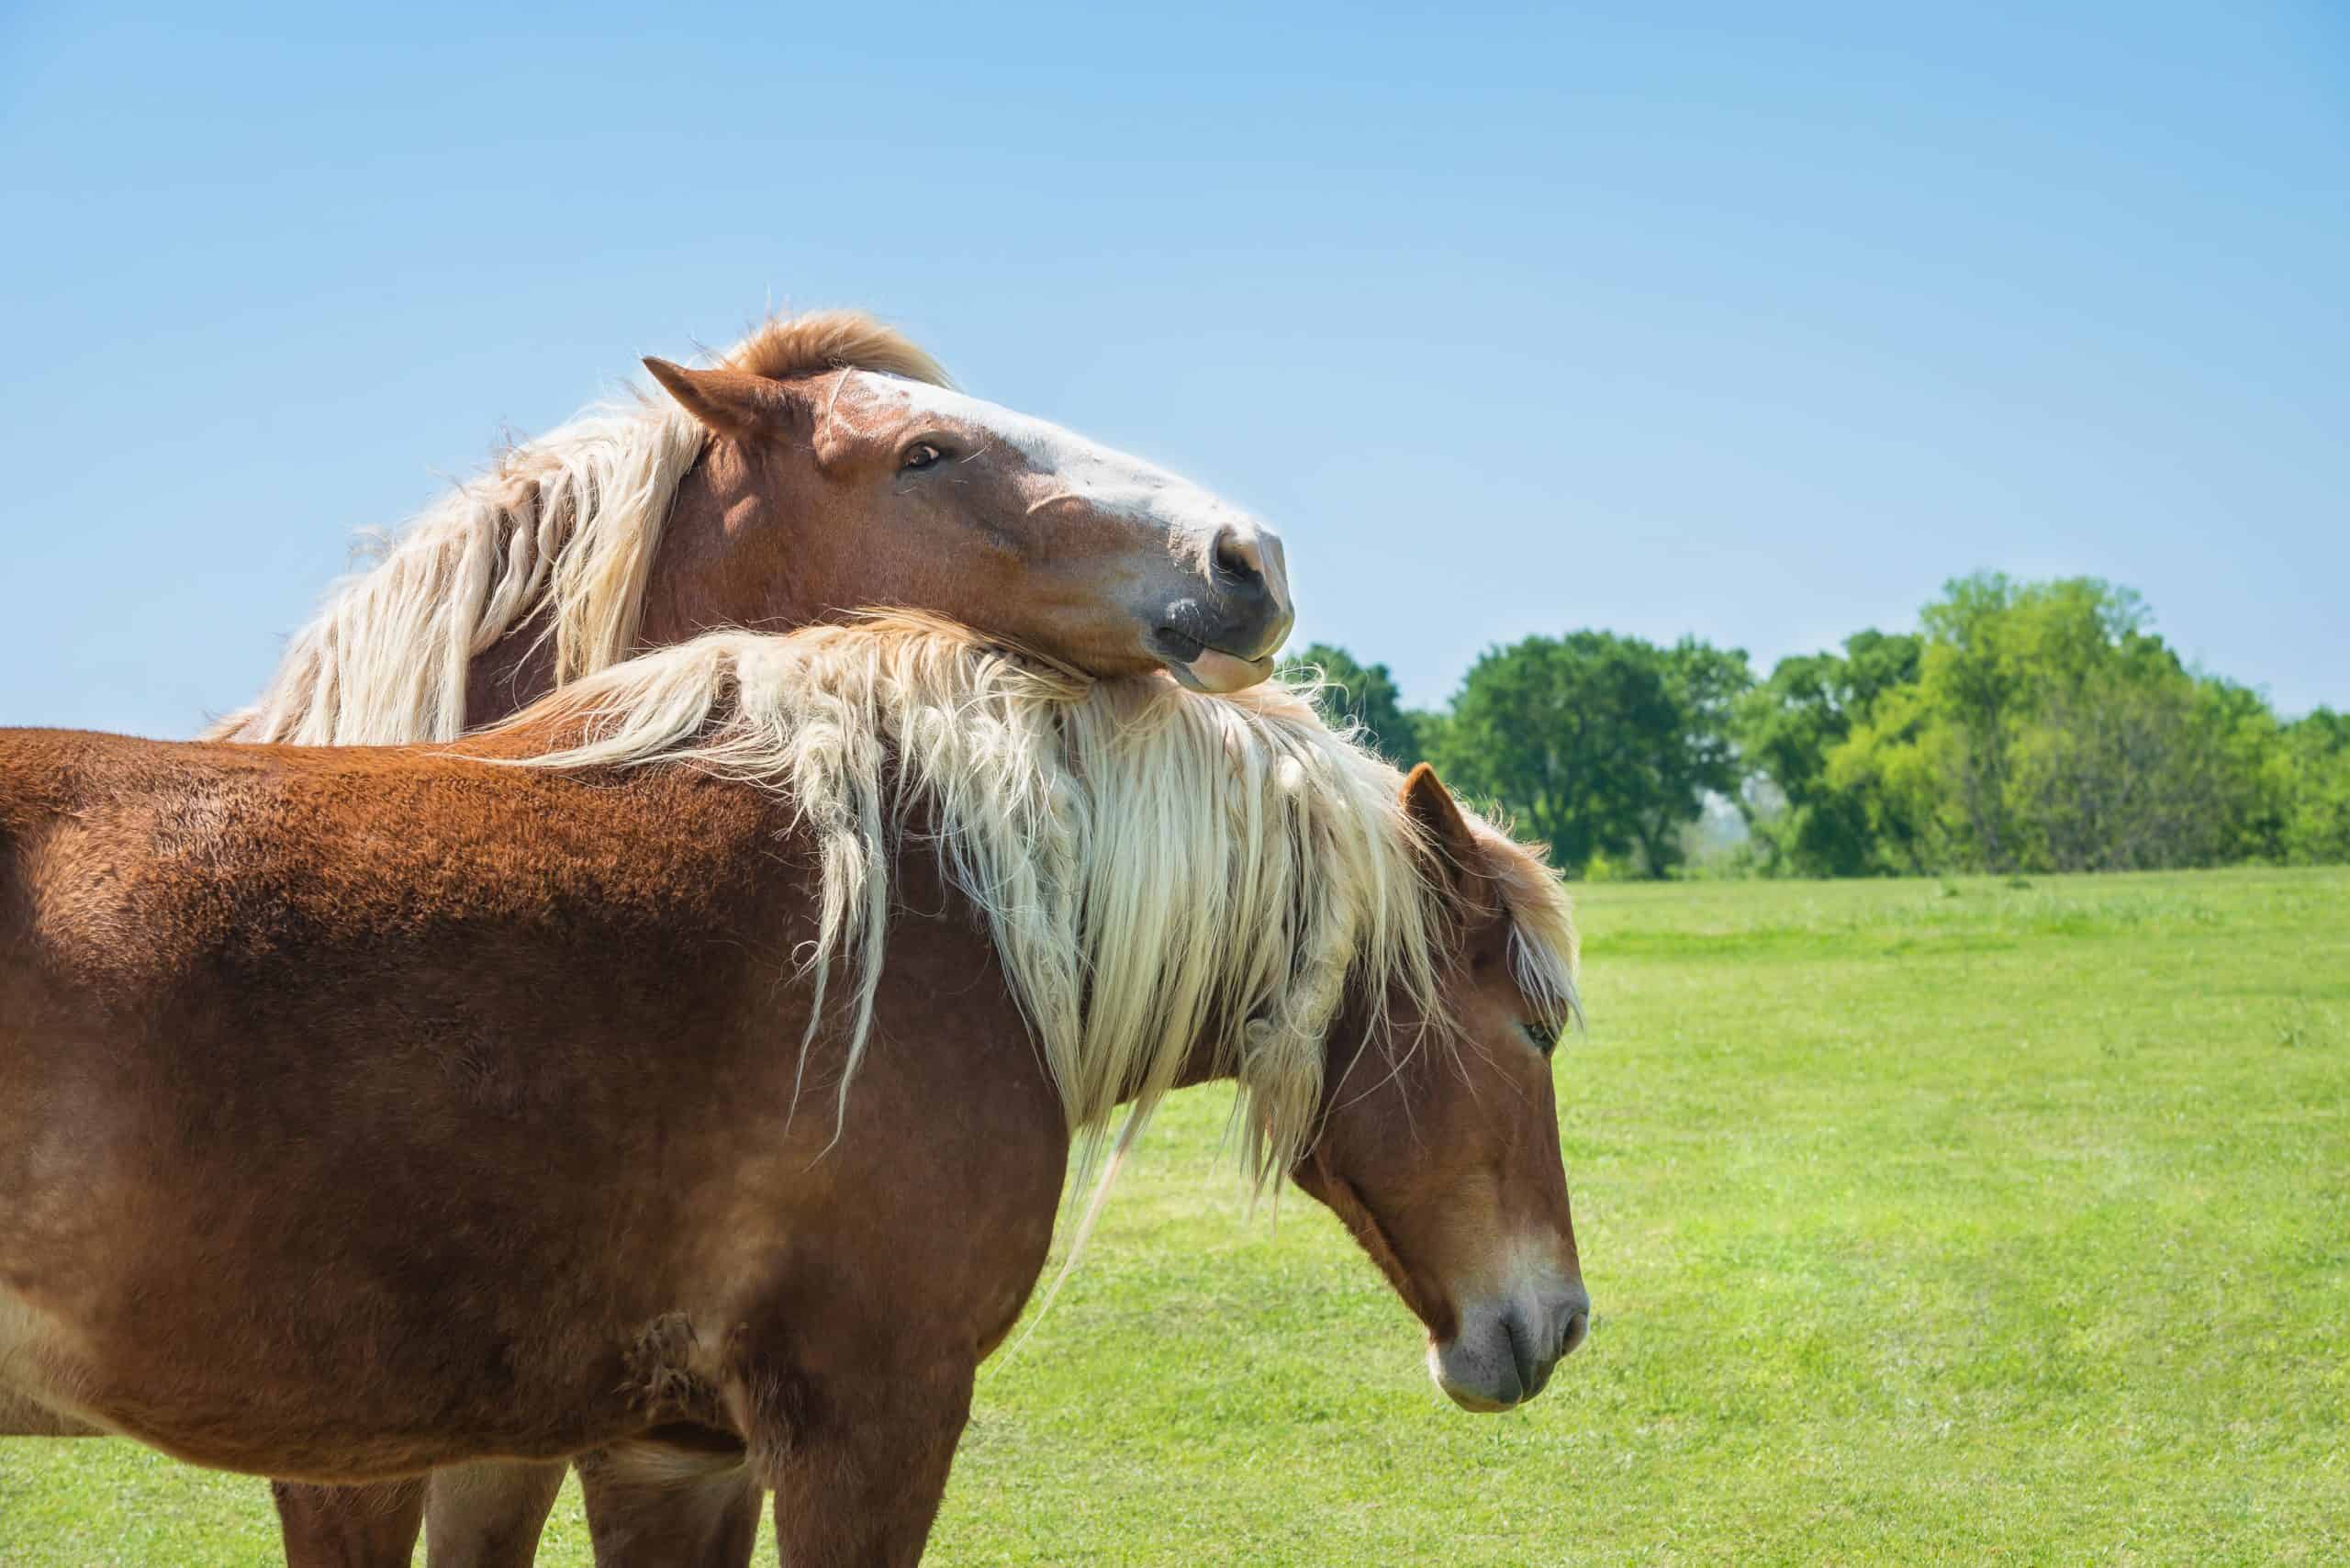 Two Belgian Draft Horses grooming each other in Texas spring. Green pasture and blue sky background with copy space.